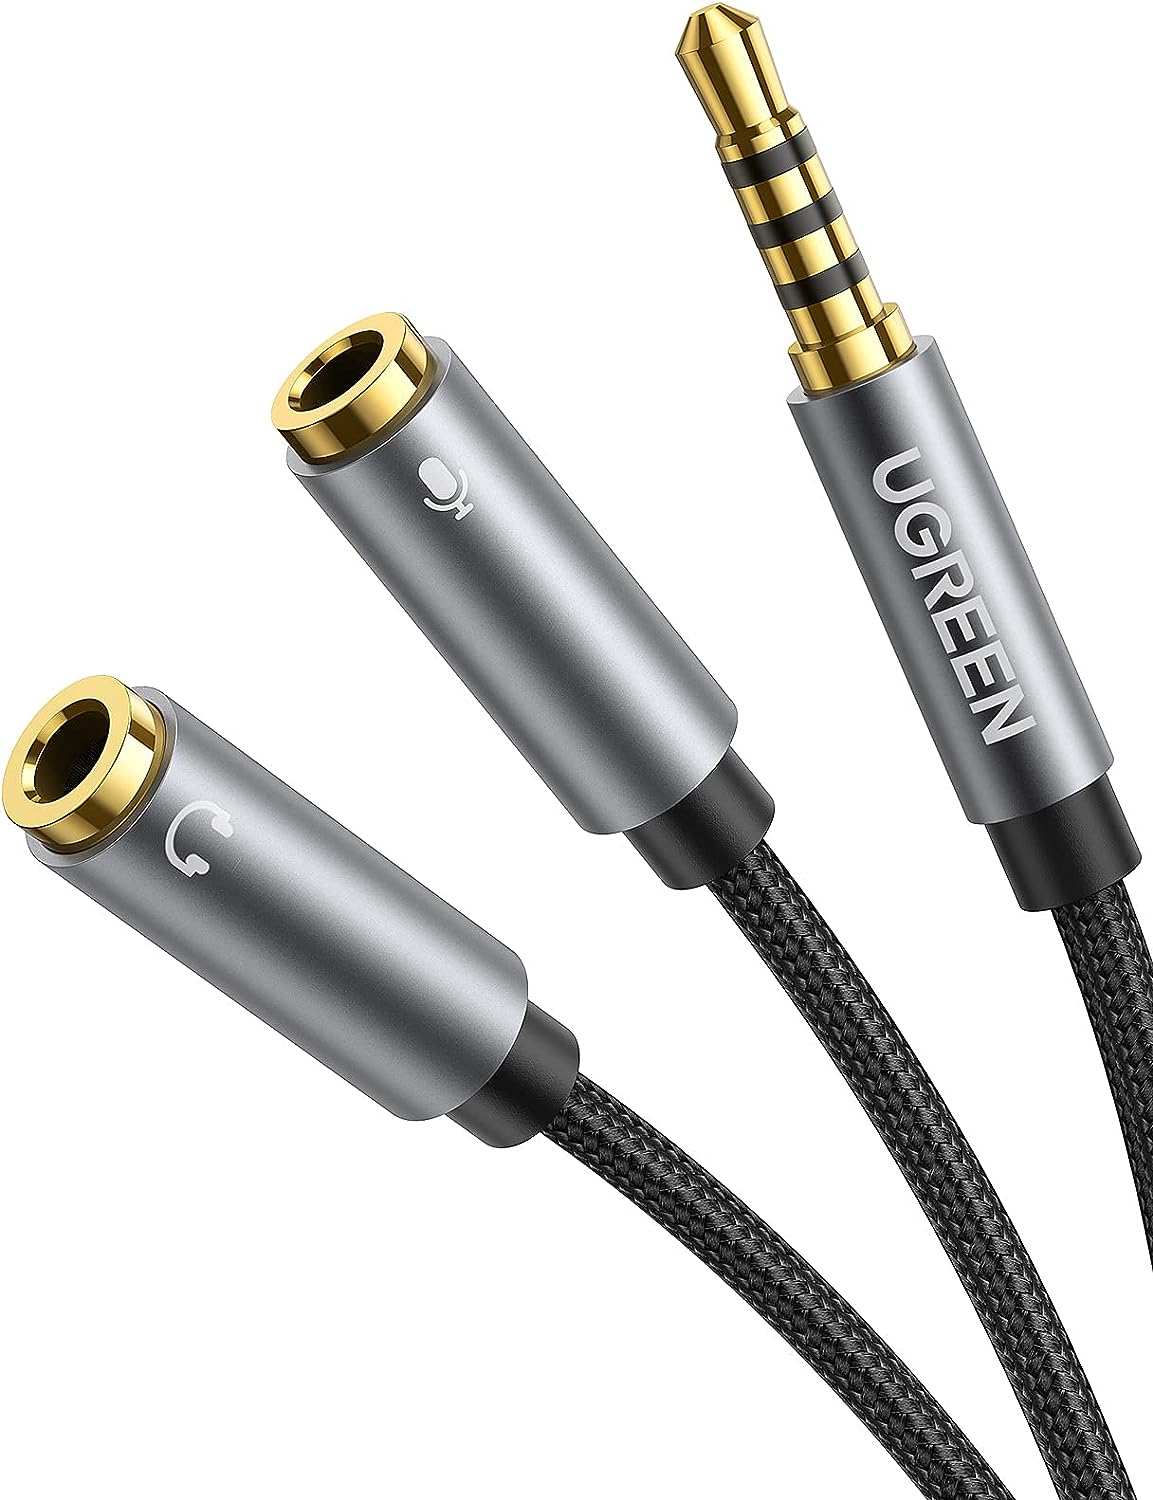 A splitter cable that splits an audio in/out into separate audio in and audio out